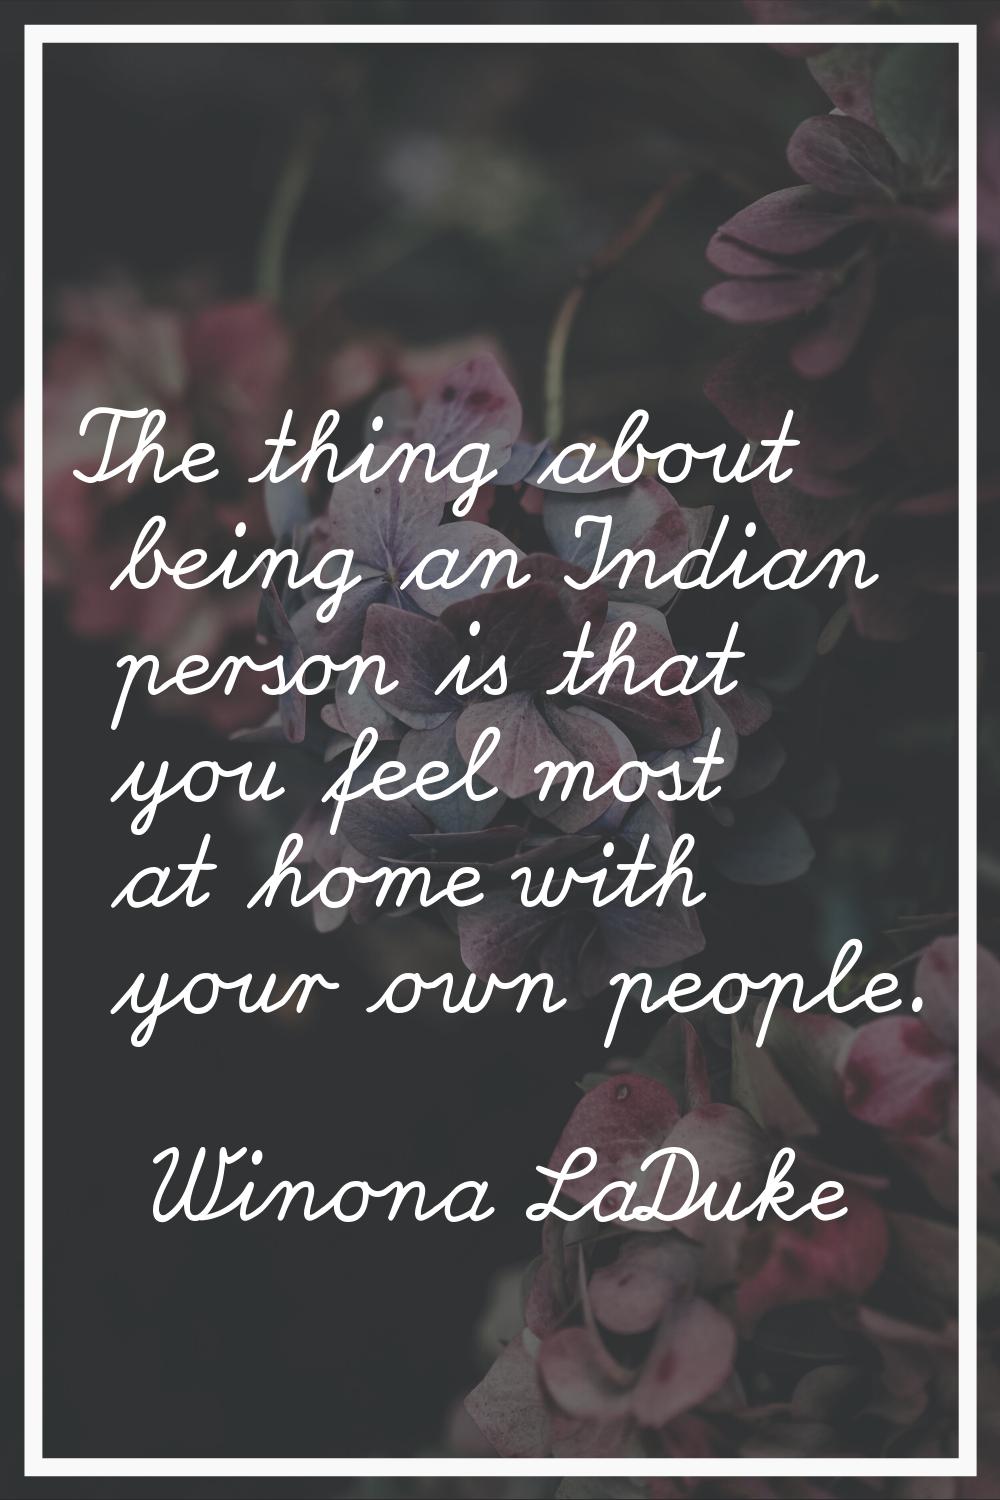 The thing about being an Indian person is that you feel most at home with your own people.